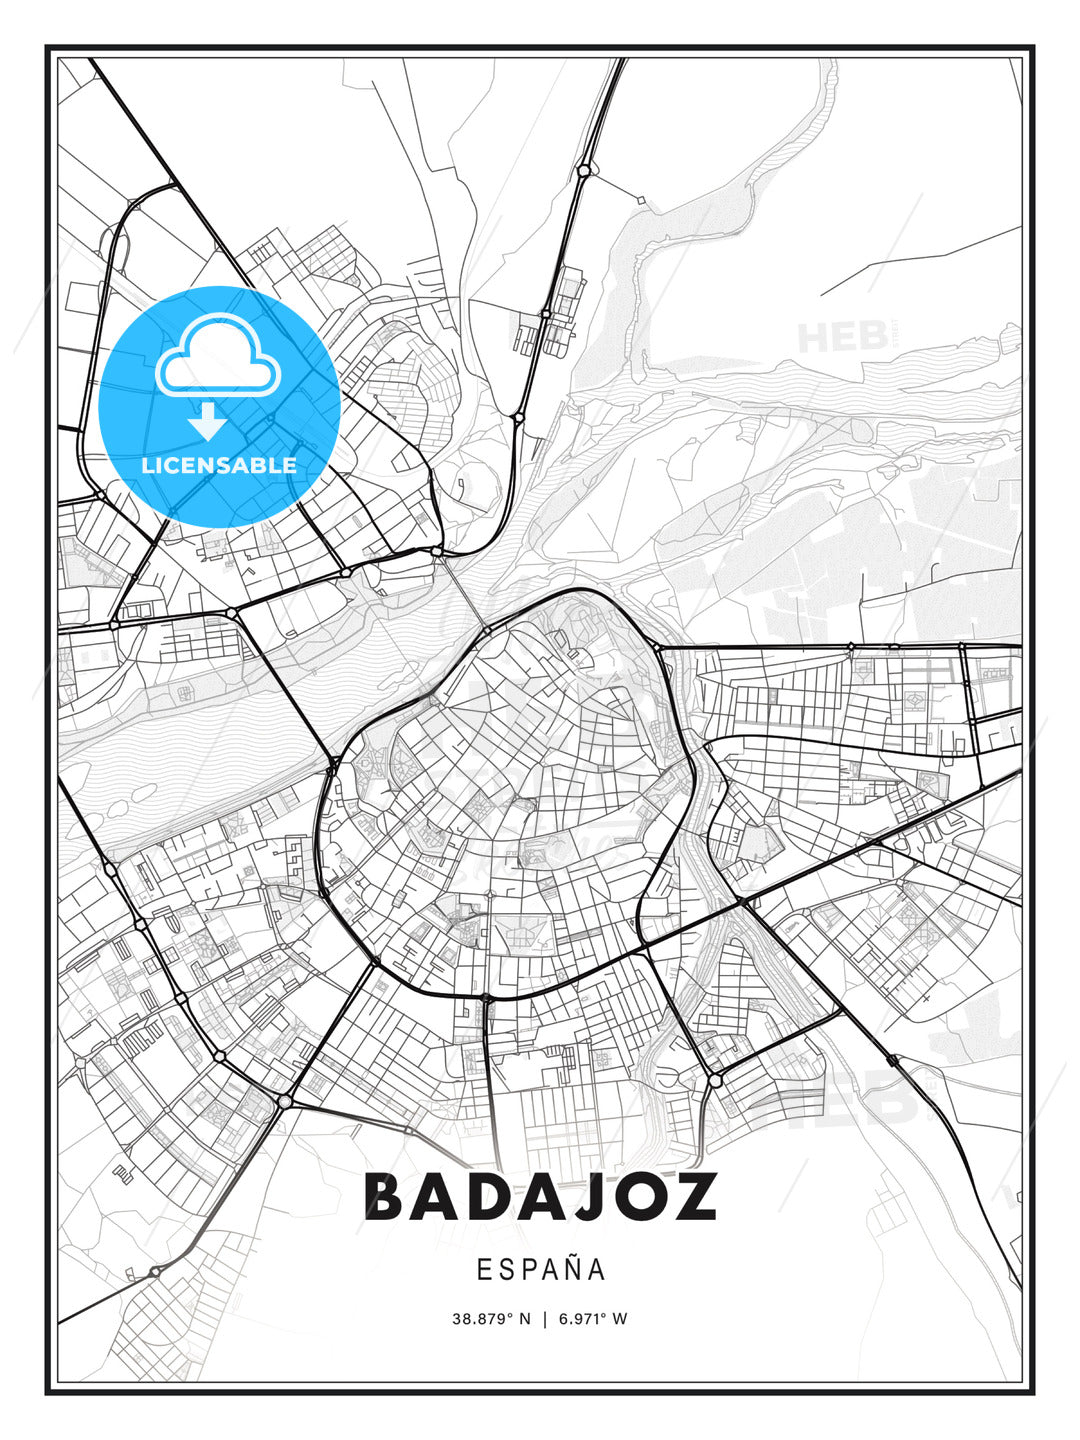 Badajoz, Spain, Modern Print Template in Various Formats - HEBSTREITS Sketches